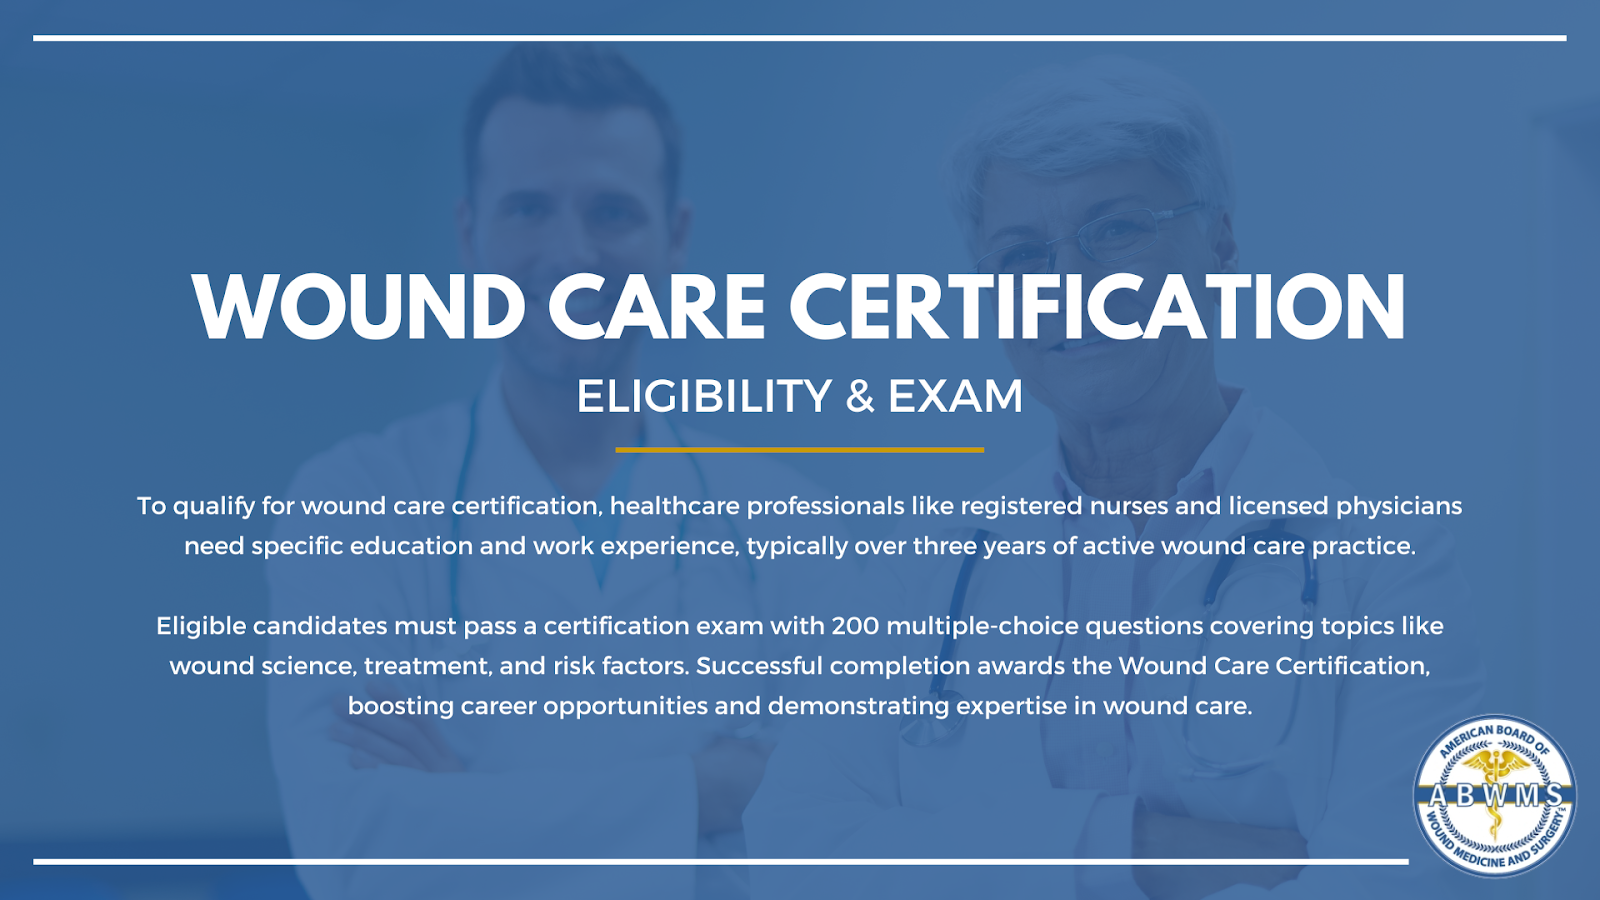 Wound Care Certification exam